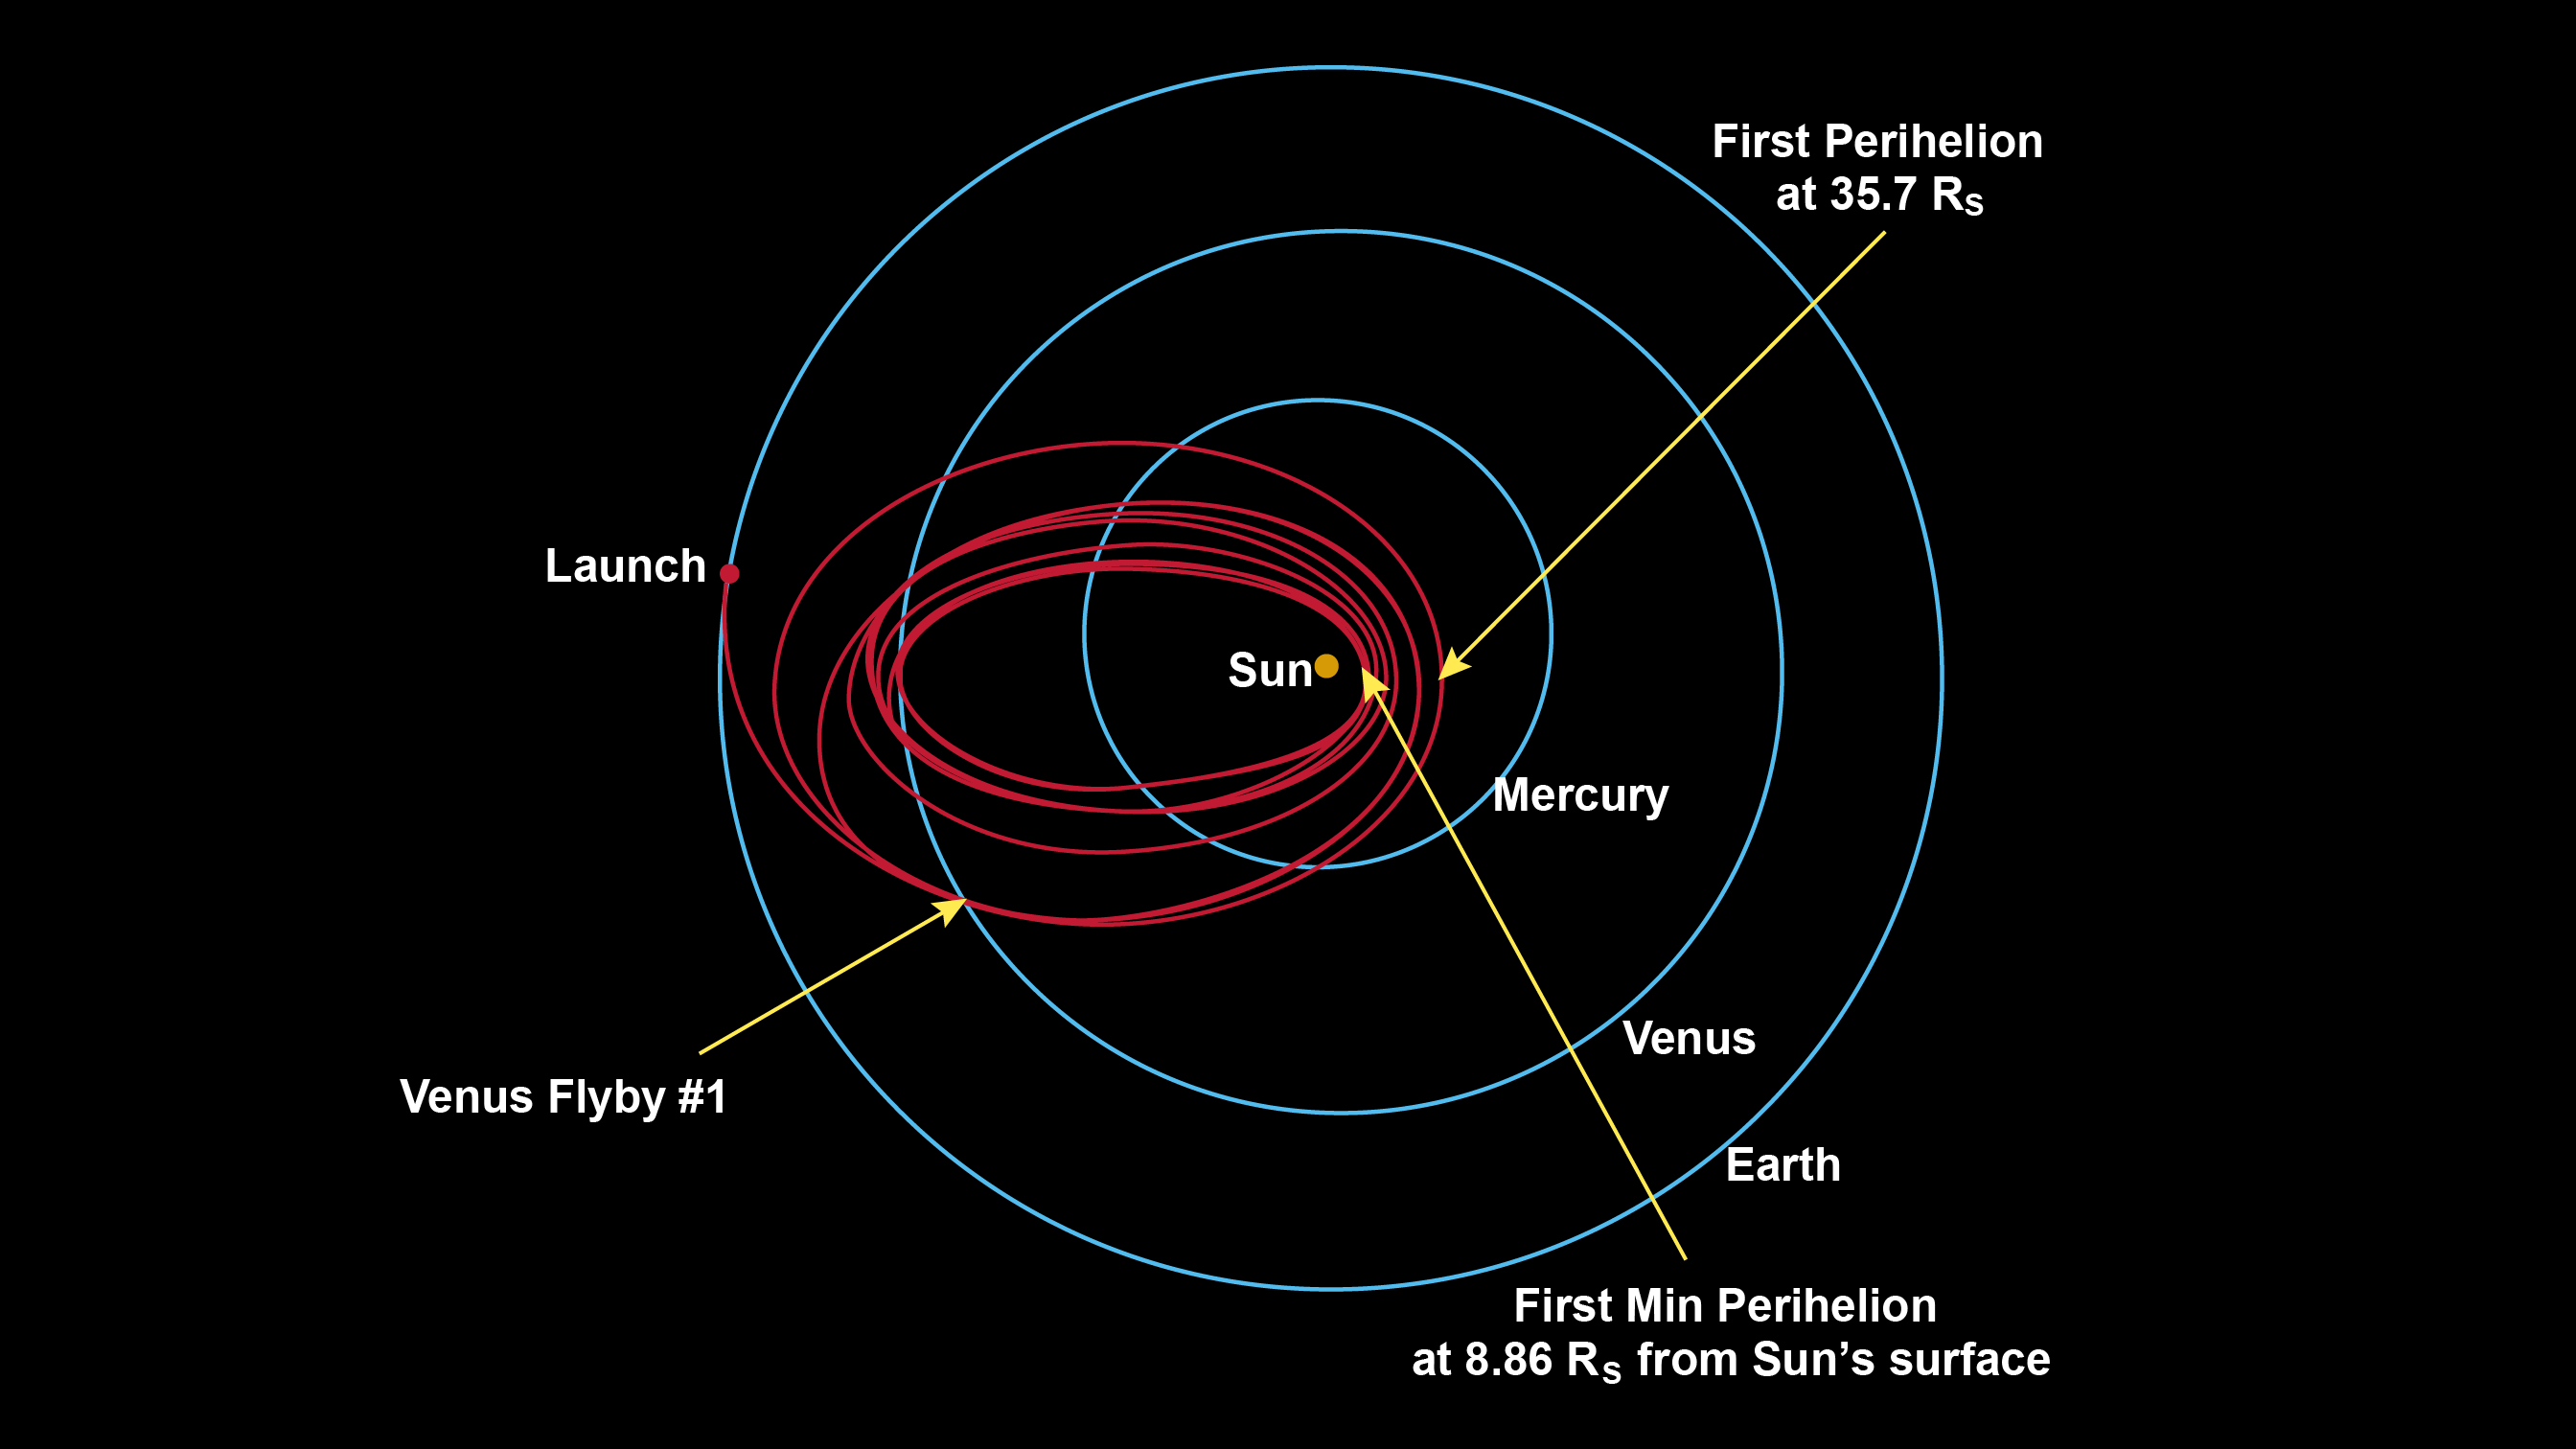 The Parker Solar Probe will make 7 Venus gravity assist flybys and 24 orbits of the sun throughout its lifetime.